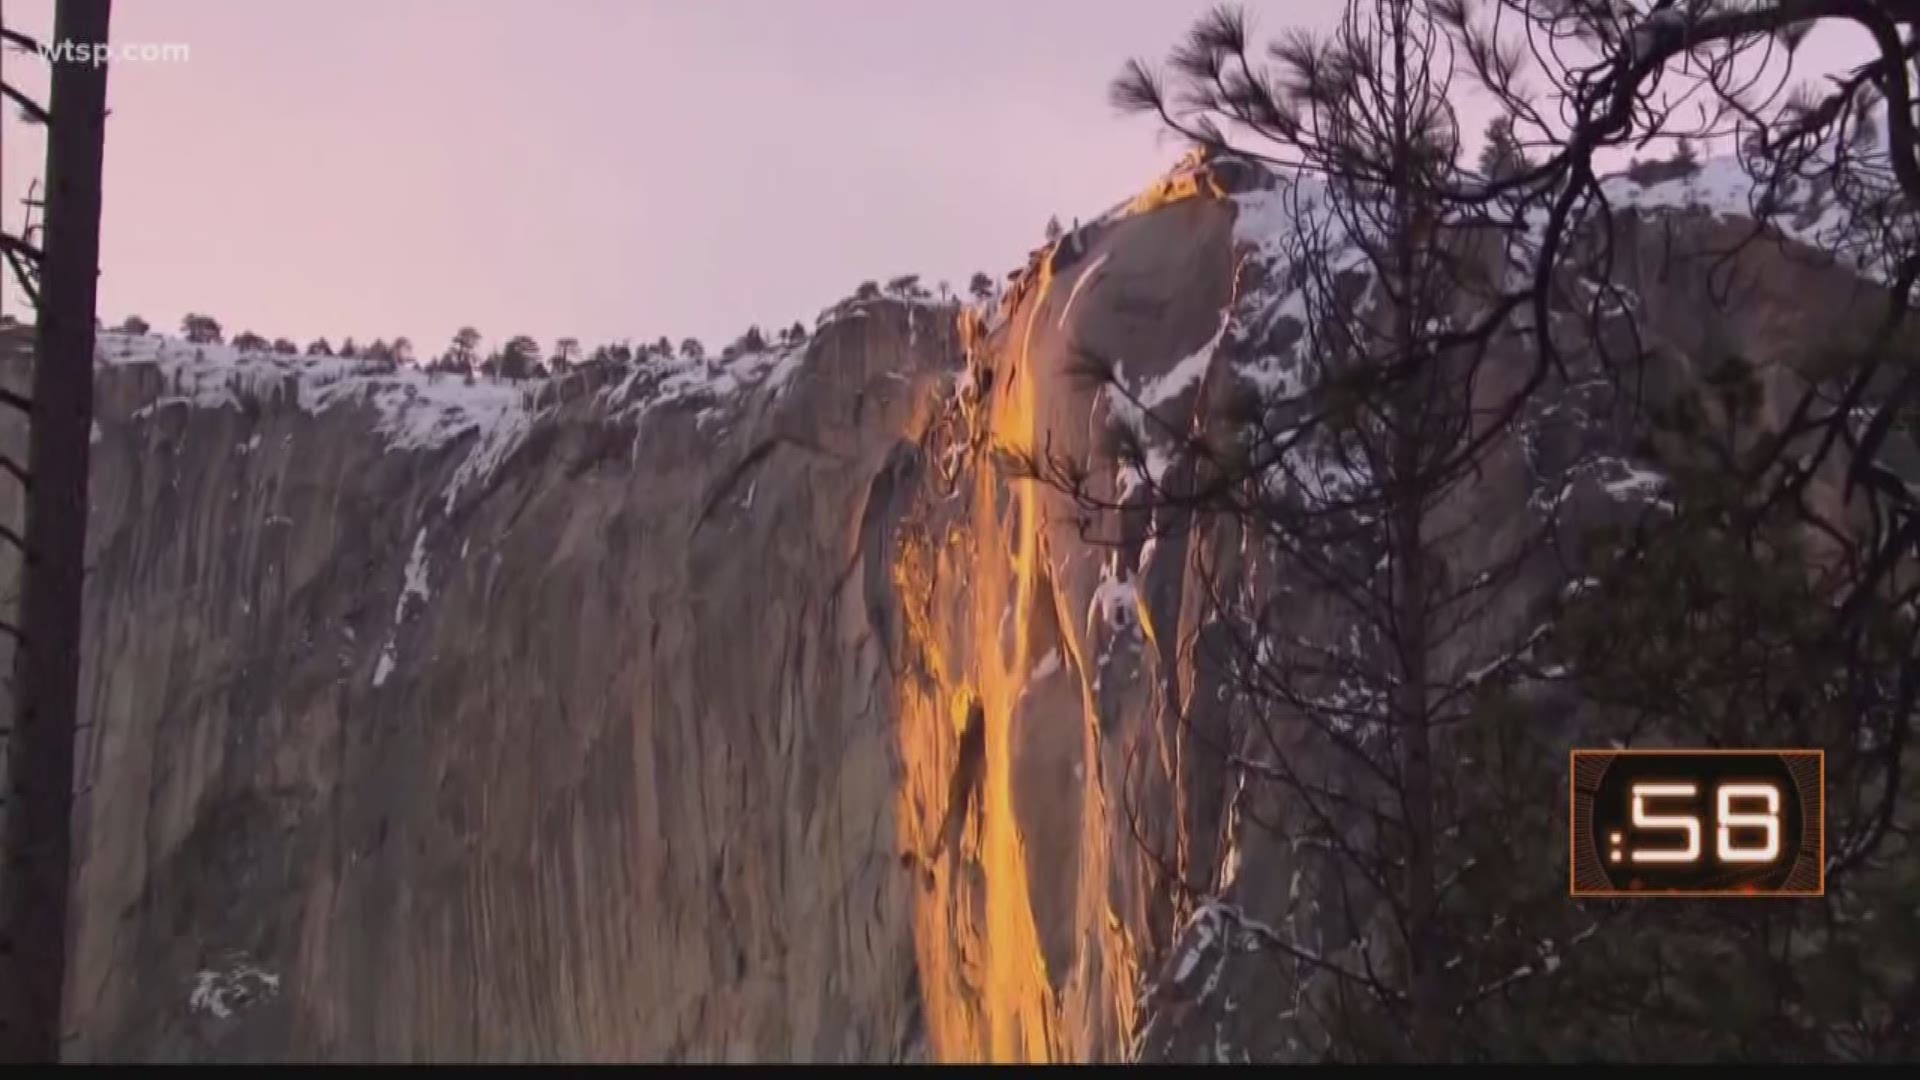 This weekend, thousands of photographers and spectators from all over will descend on Yosemite National Park to take in an incredible sight.